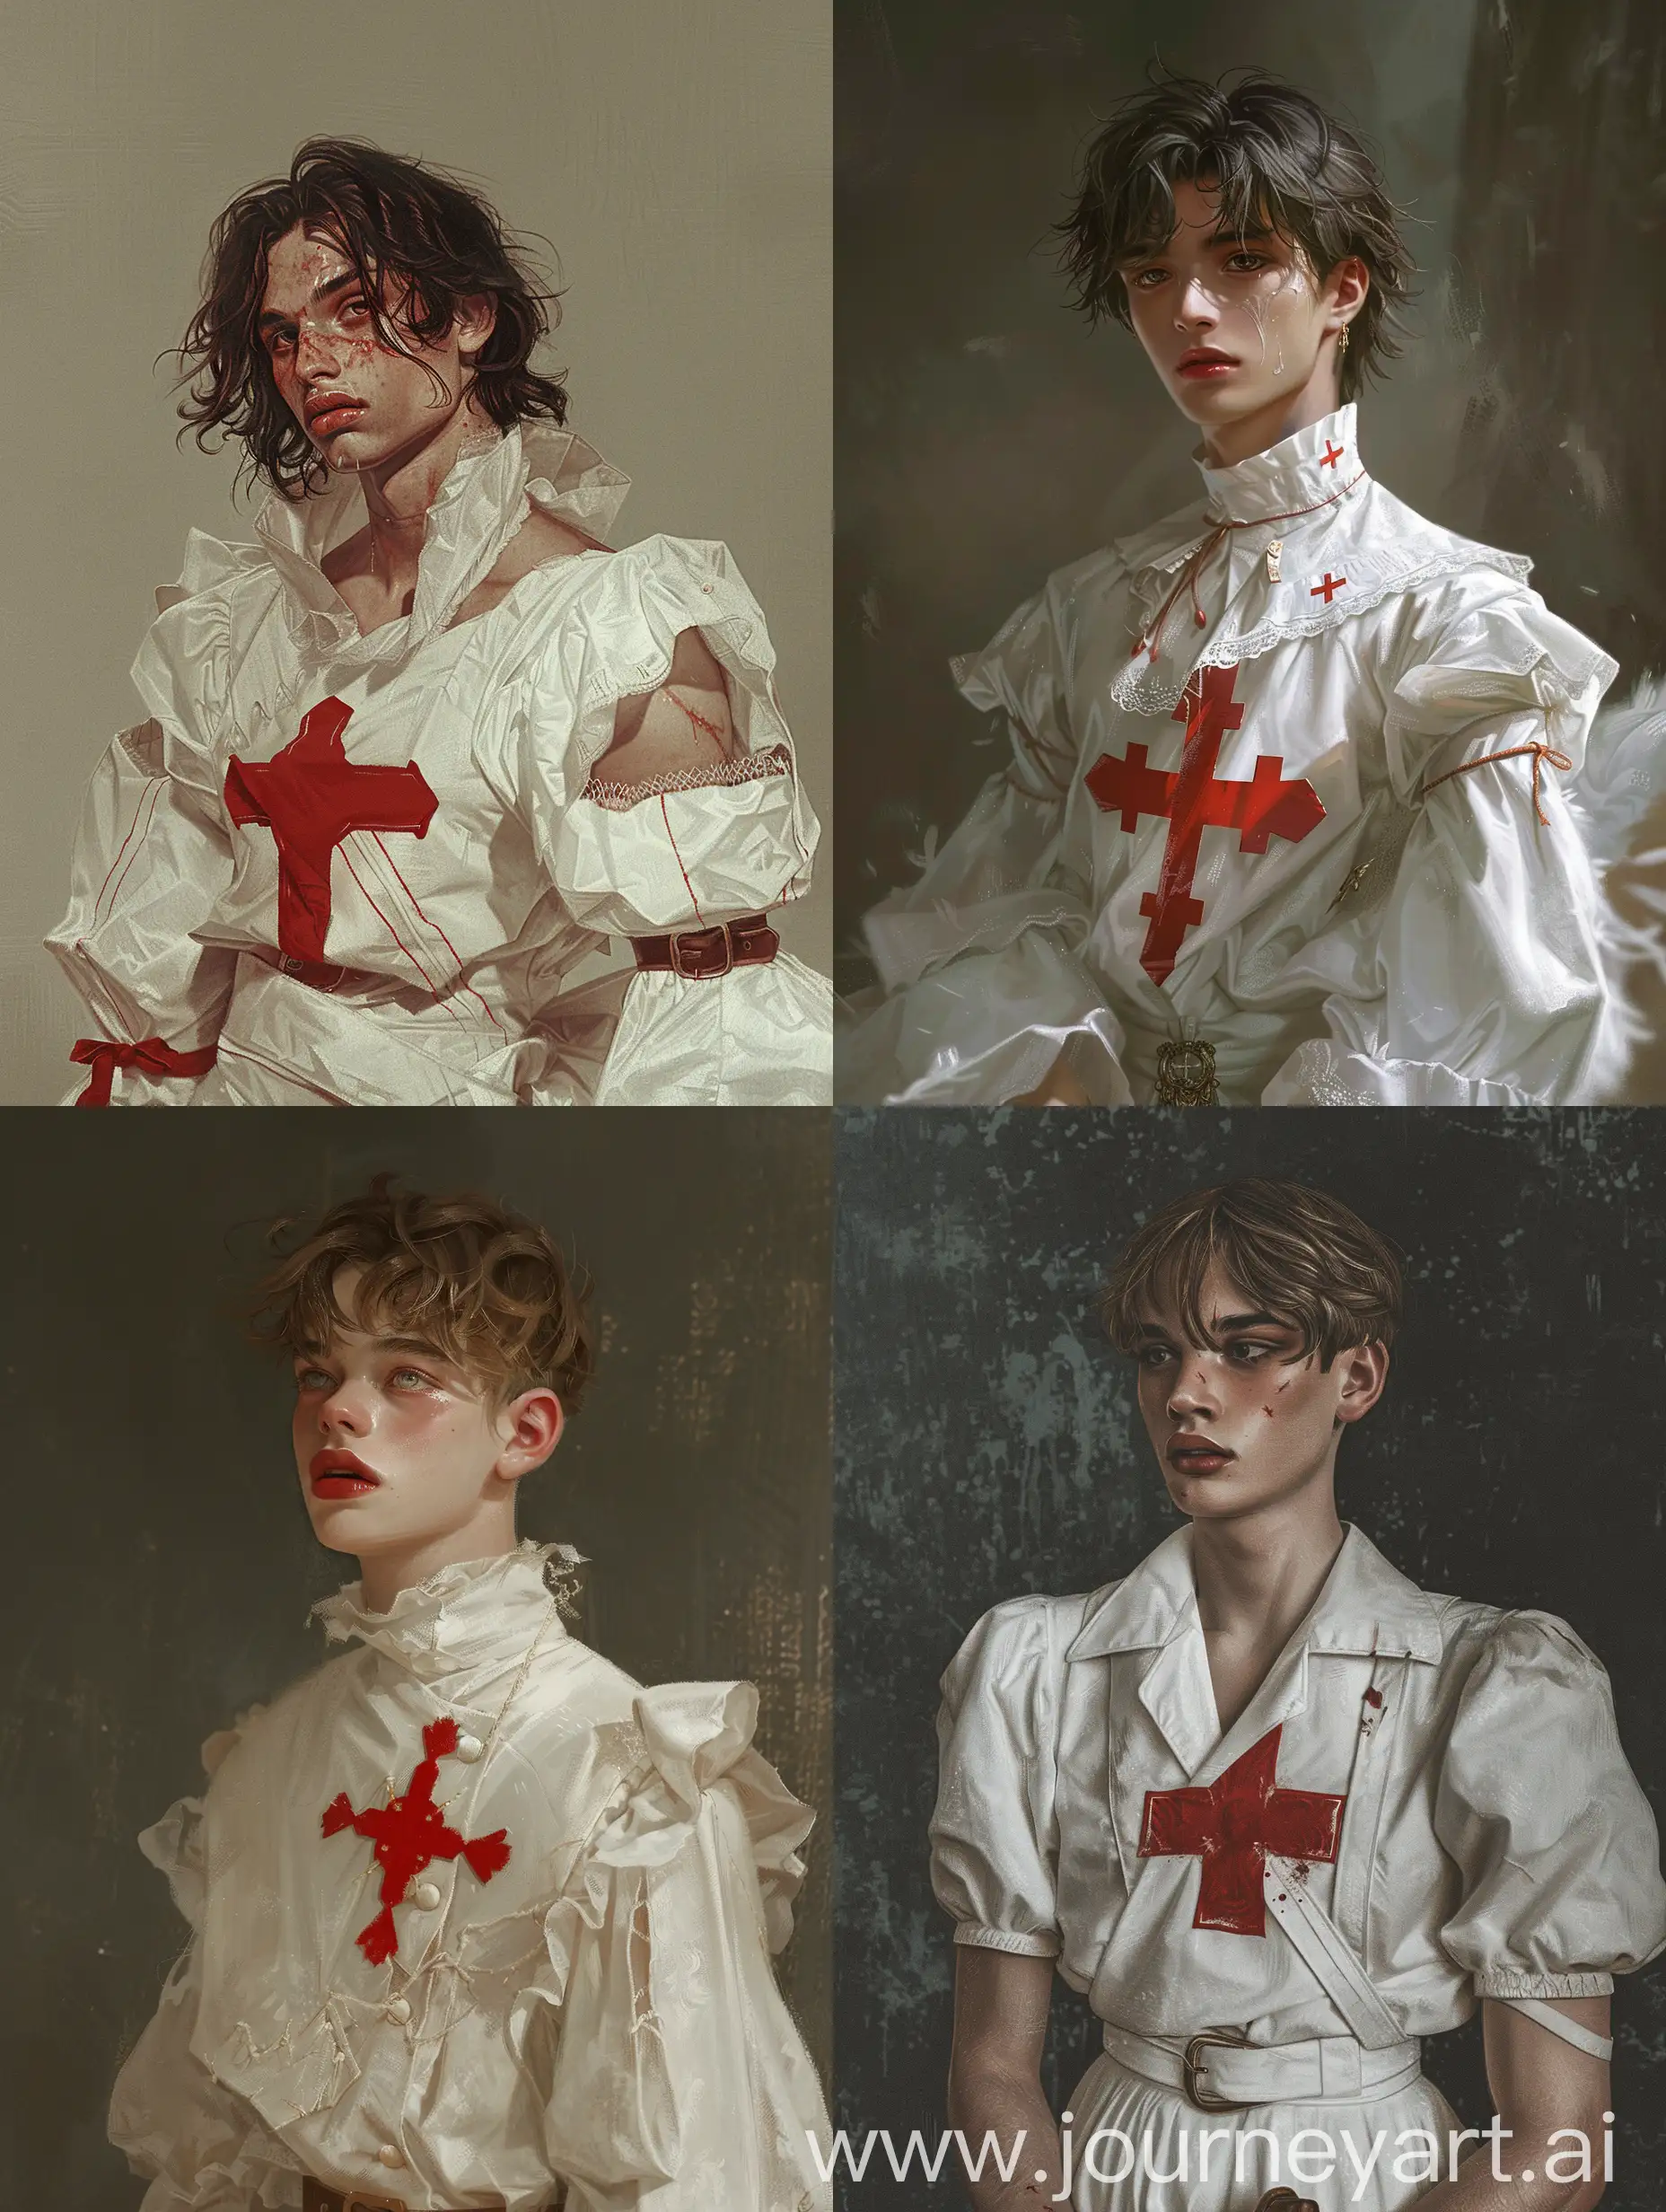 Ethereal-Angelic-Figure-Delicate-Young-Man-in-White-Garb-with-a-Red-Cross